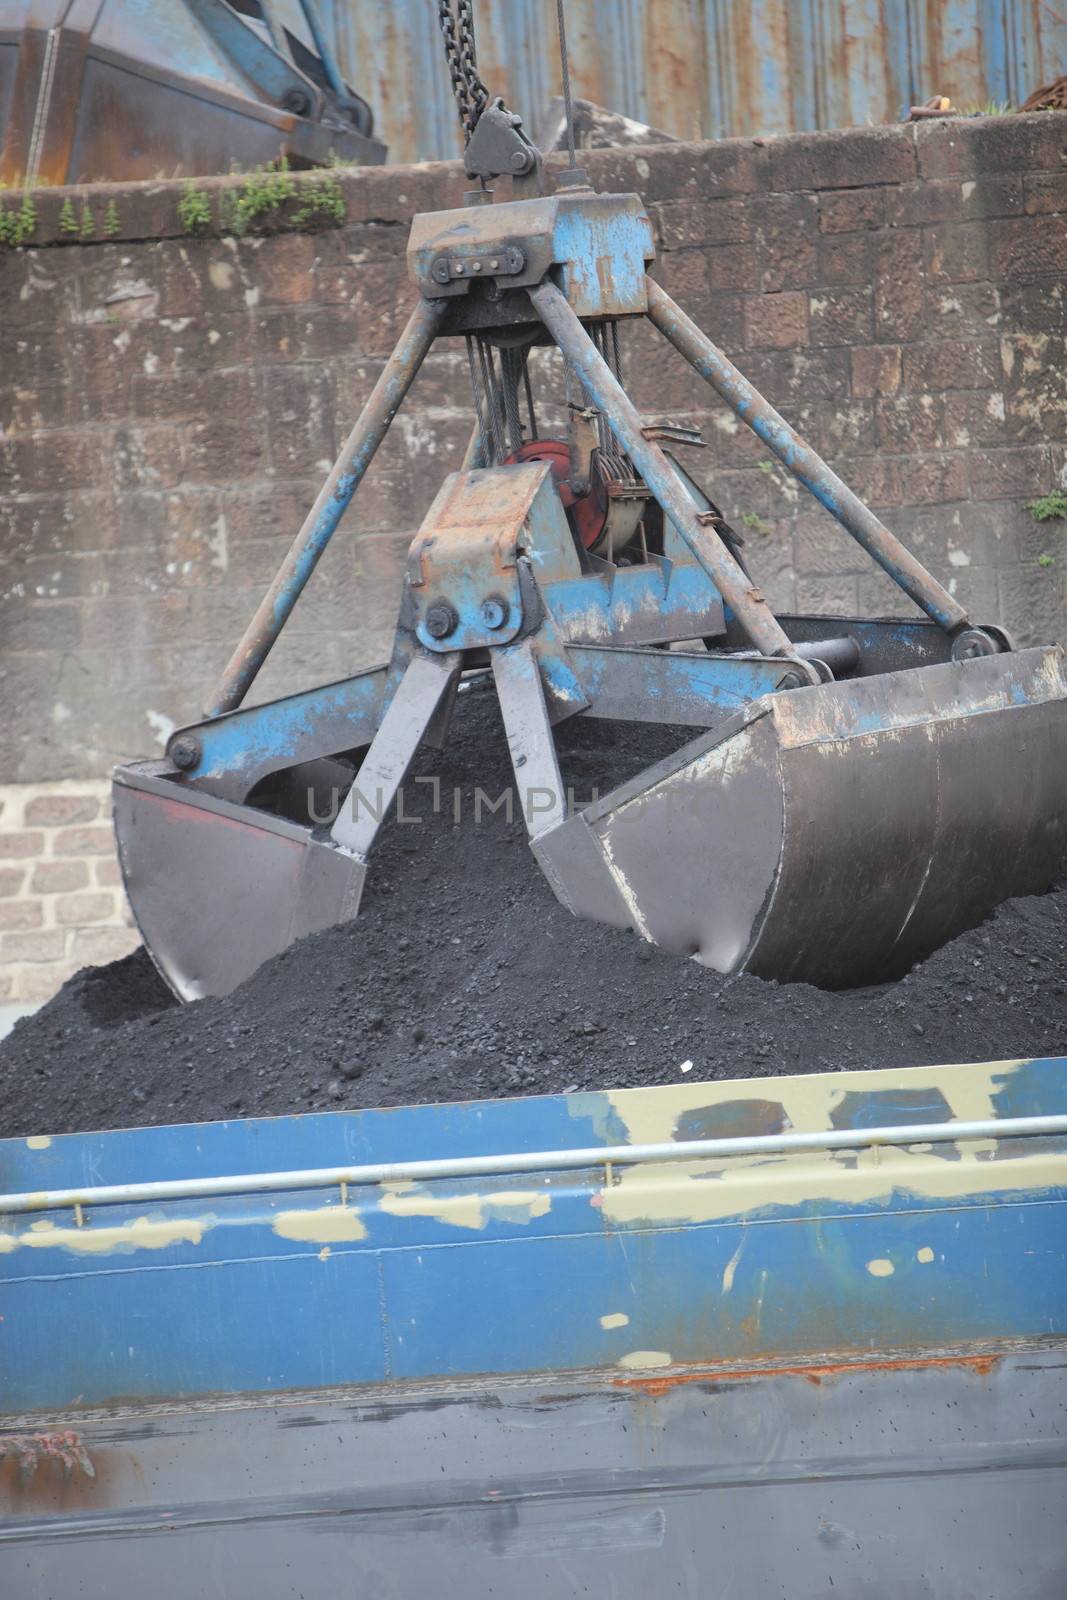 Mechanical bucket on a crane picking up a load of crushed stone from a quarry or mine that has been transported in a metal container